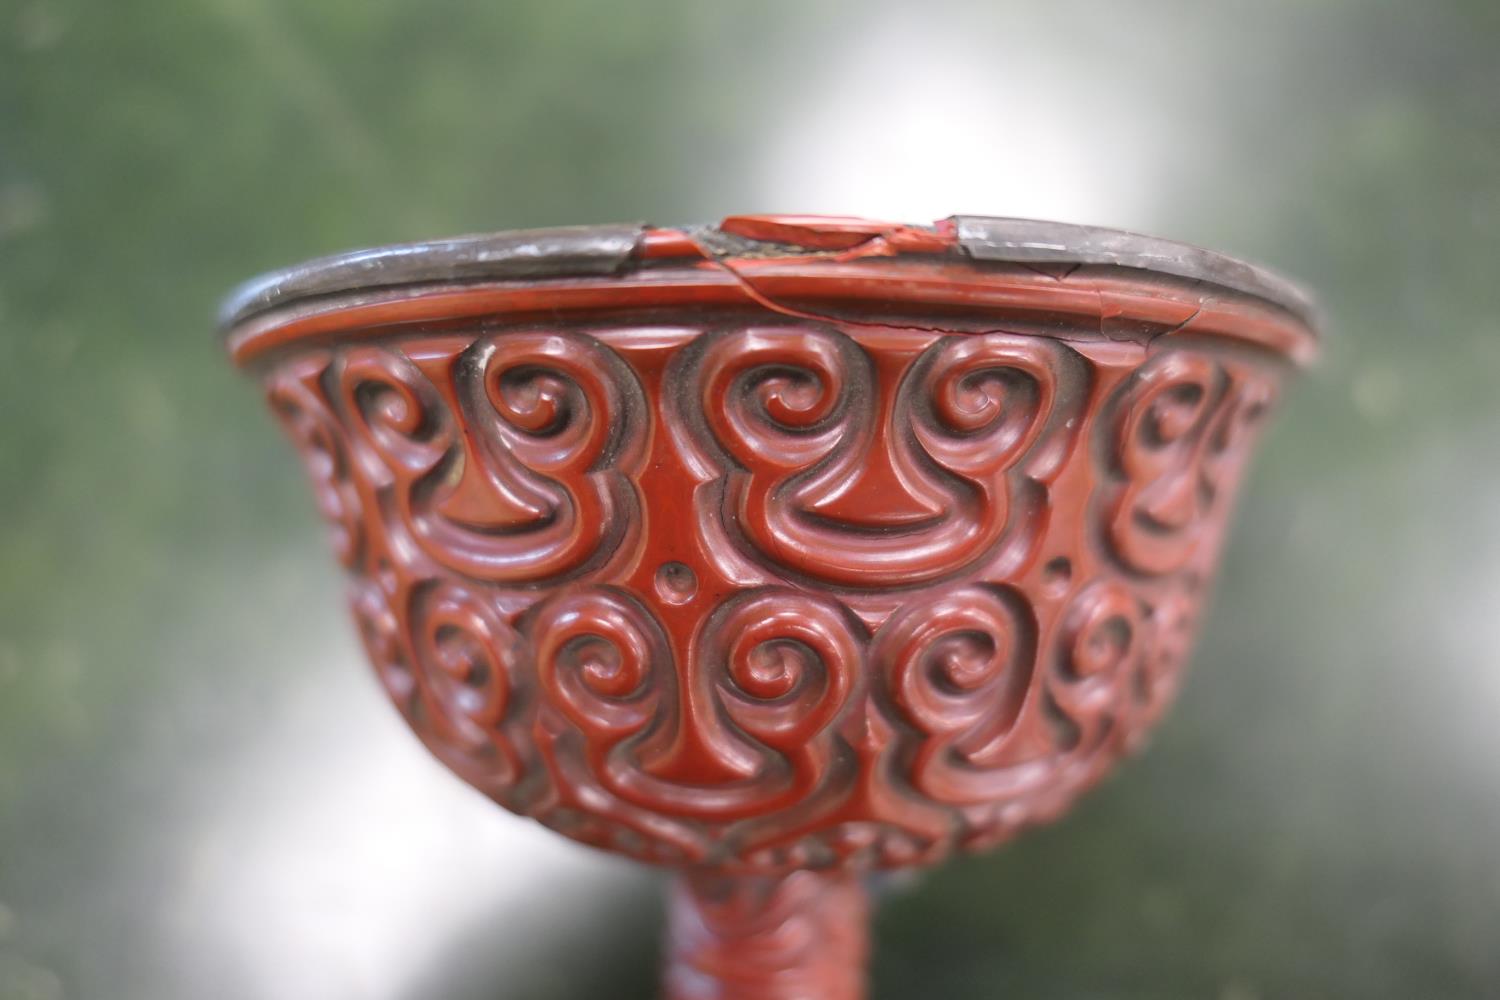 Chinese red guri lacquer stem cup, Ming Dynasty, probably 15th or 16th Century, carved in relief - Image 6 of 15